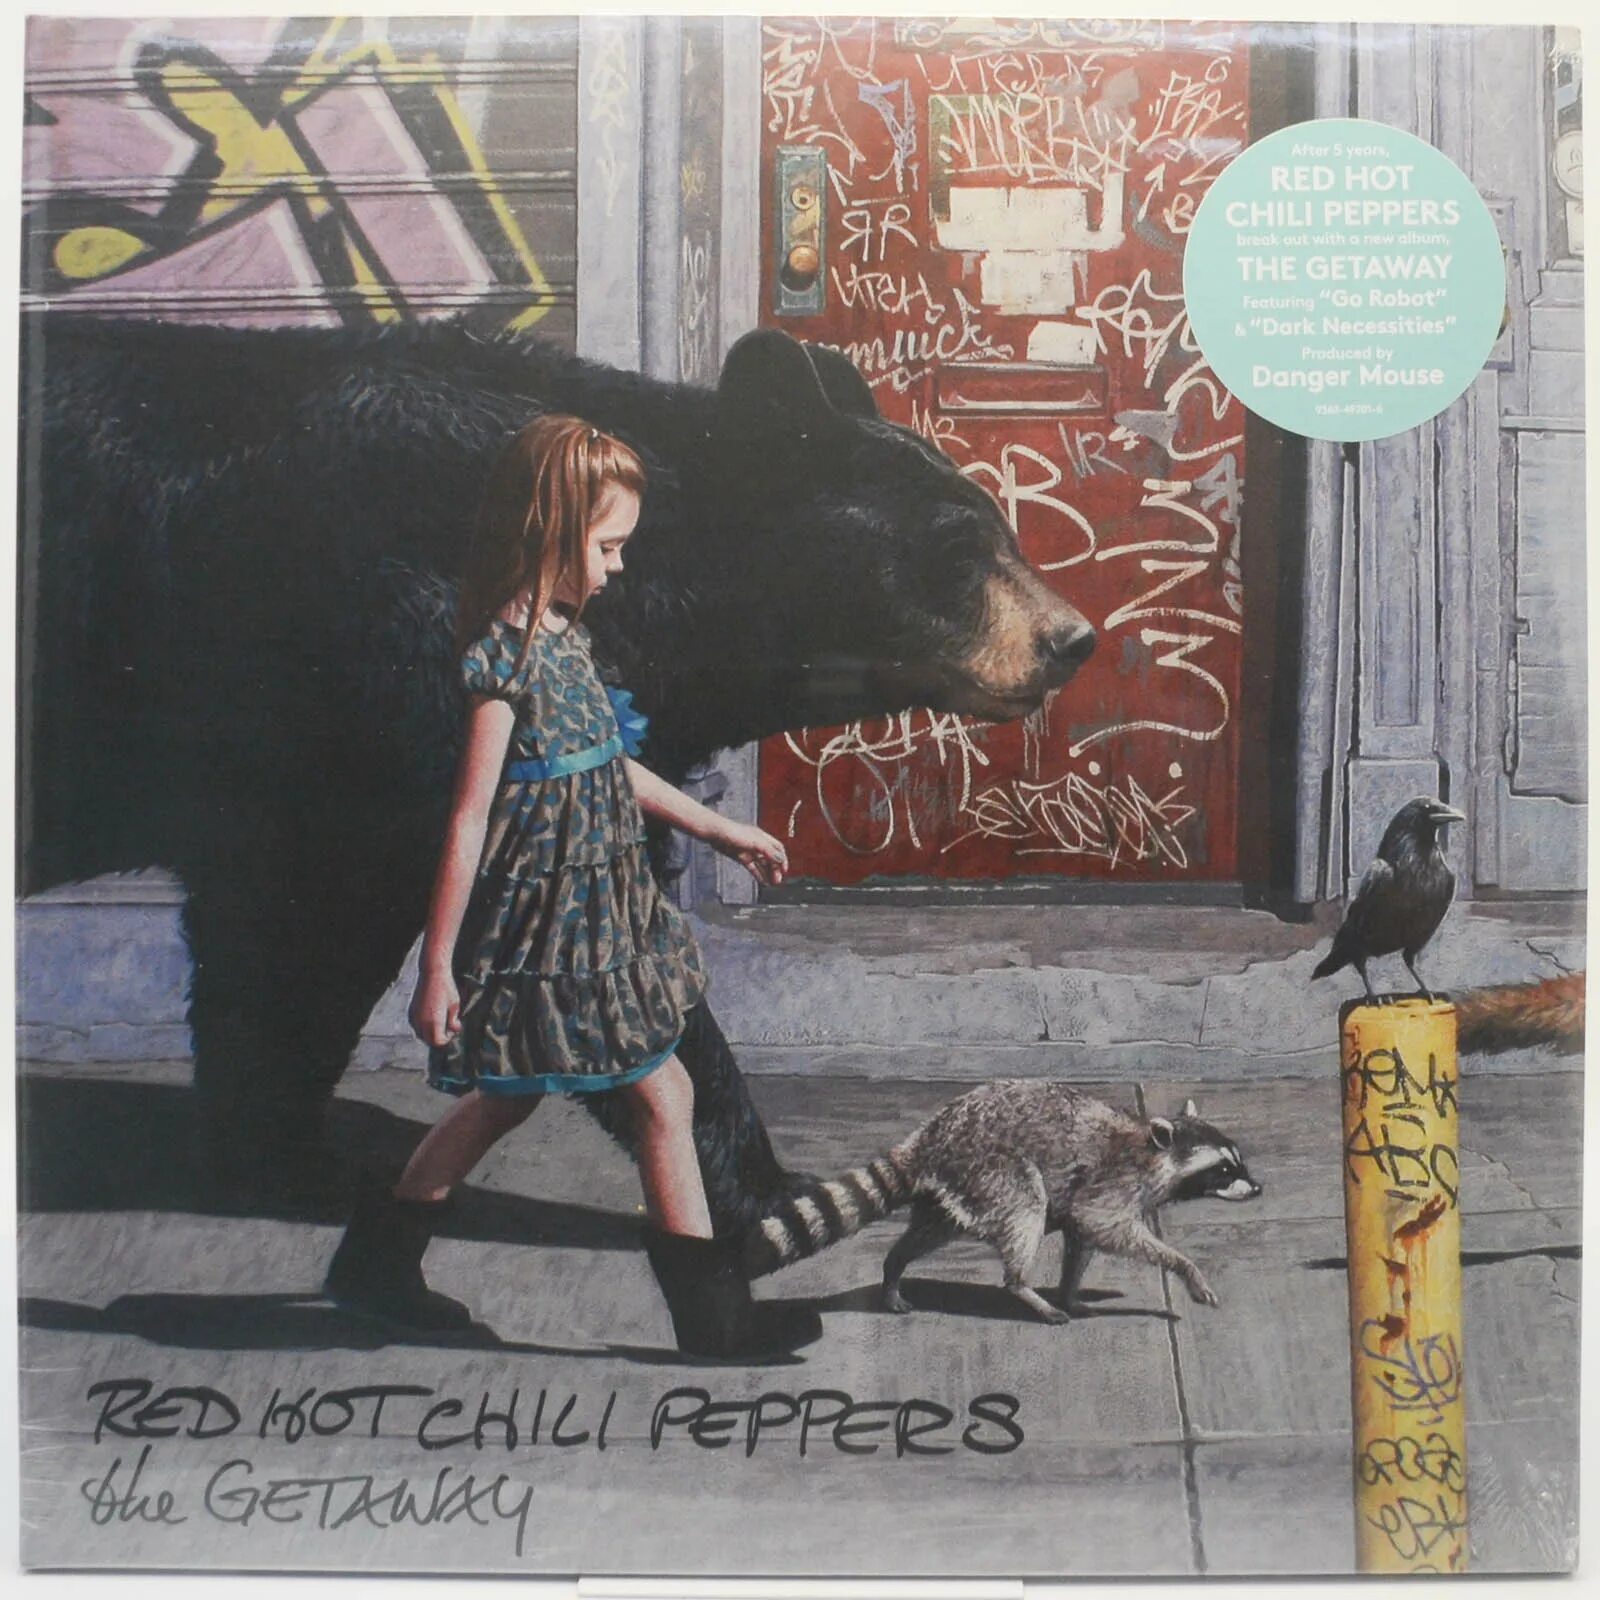 Red hot Chili Peppers - the Getaway - 2016 - LP. Red hot Chili Peppers the Getaway 2016. The Getaway альбом Red hot Chili Peppers. Red hot Chili Peppers альбомы.